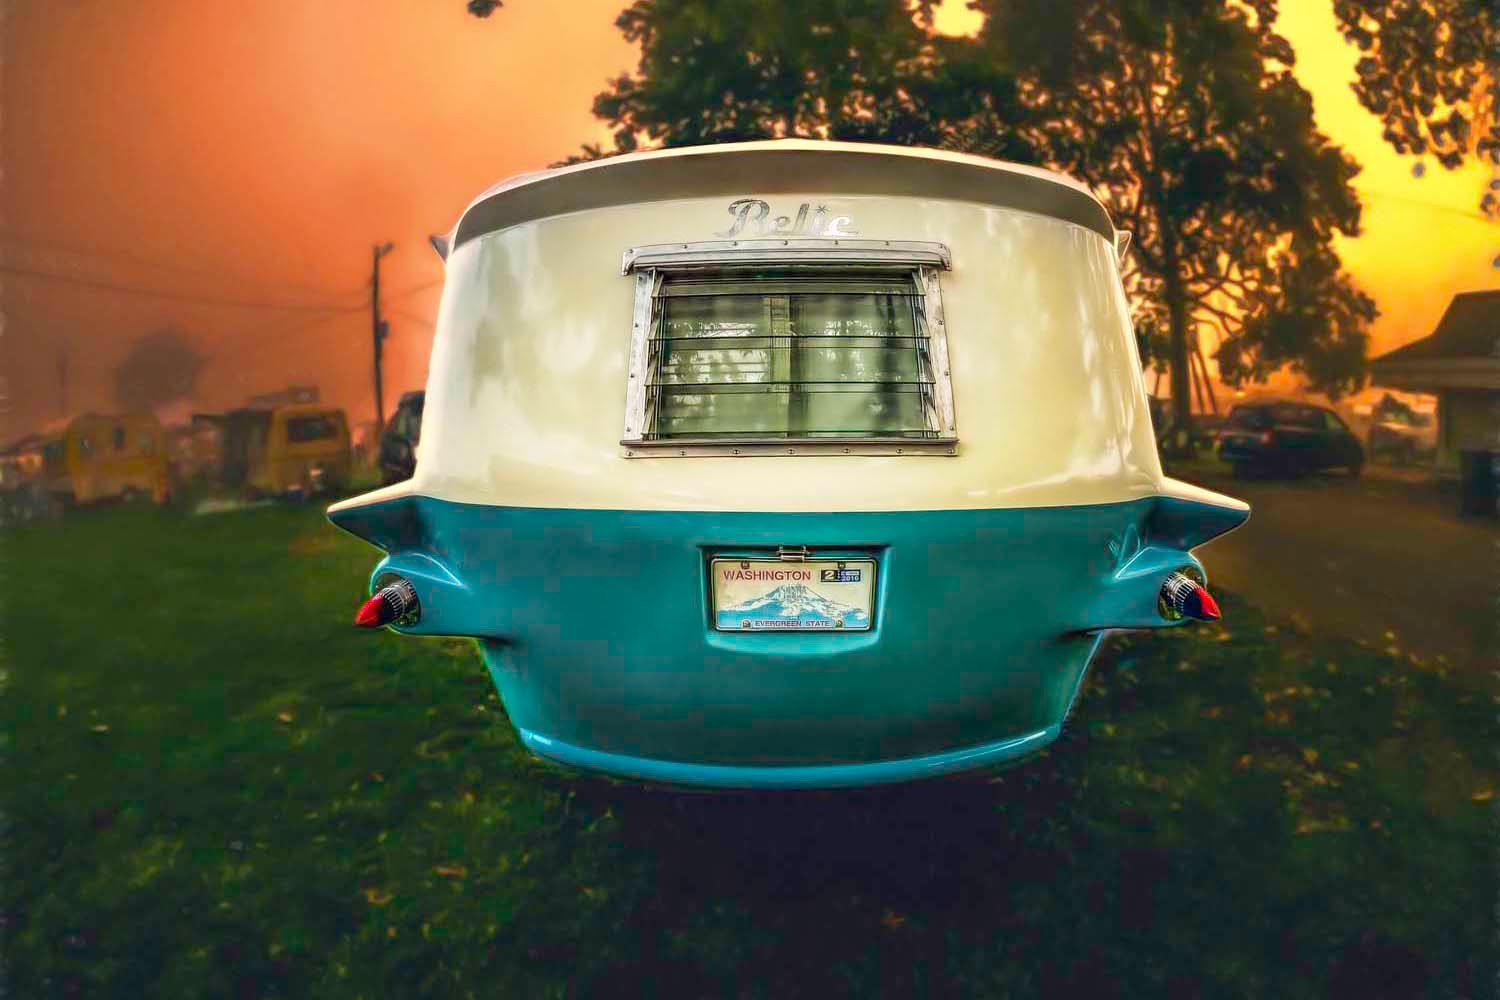 relic custom trailers are 60s inspired campers 007